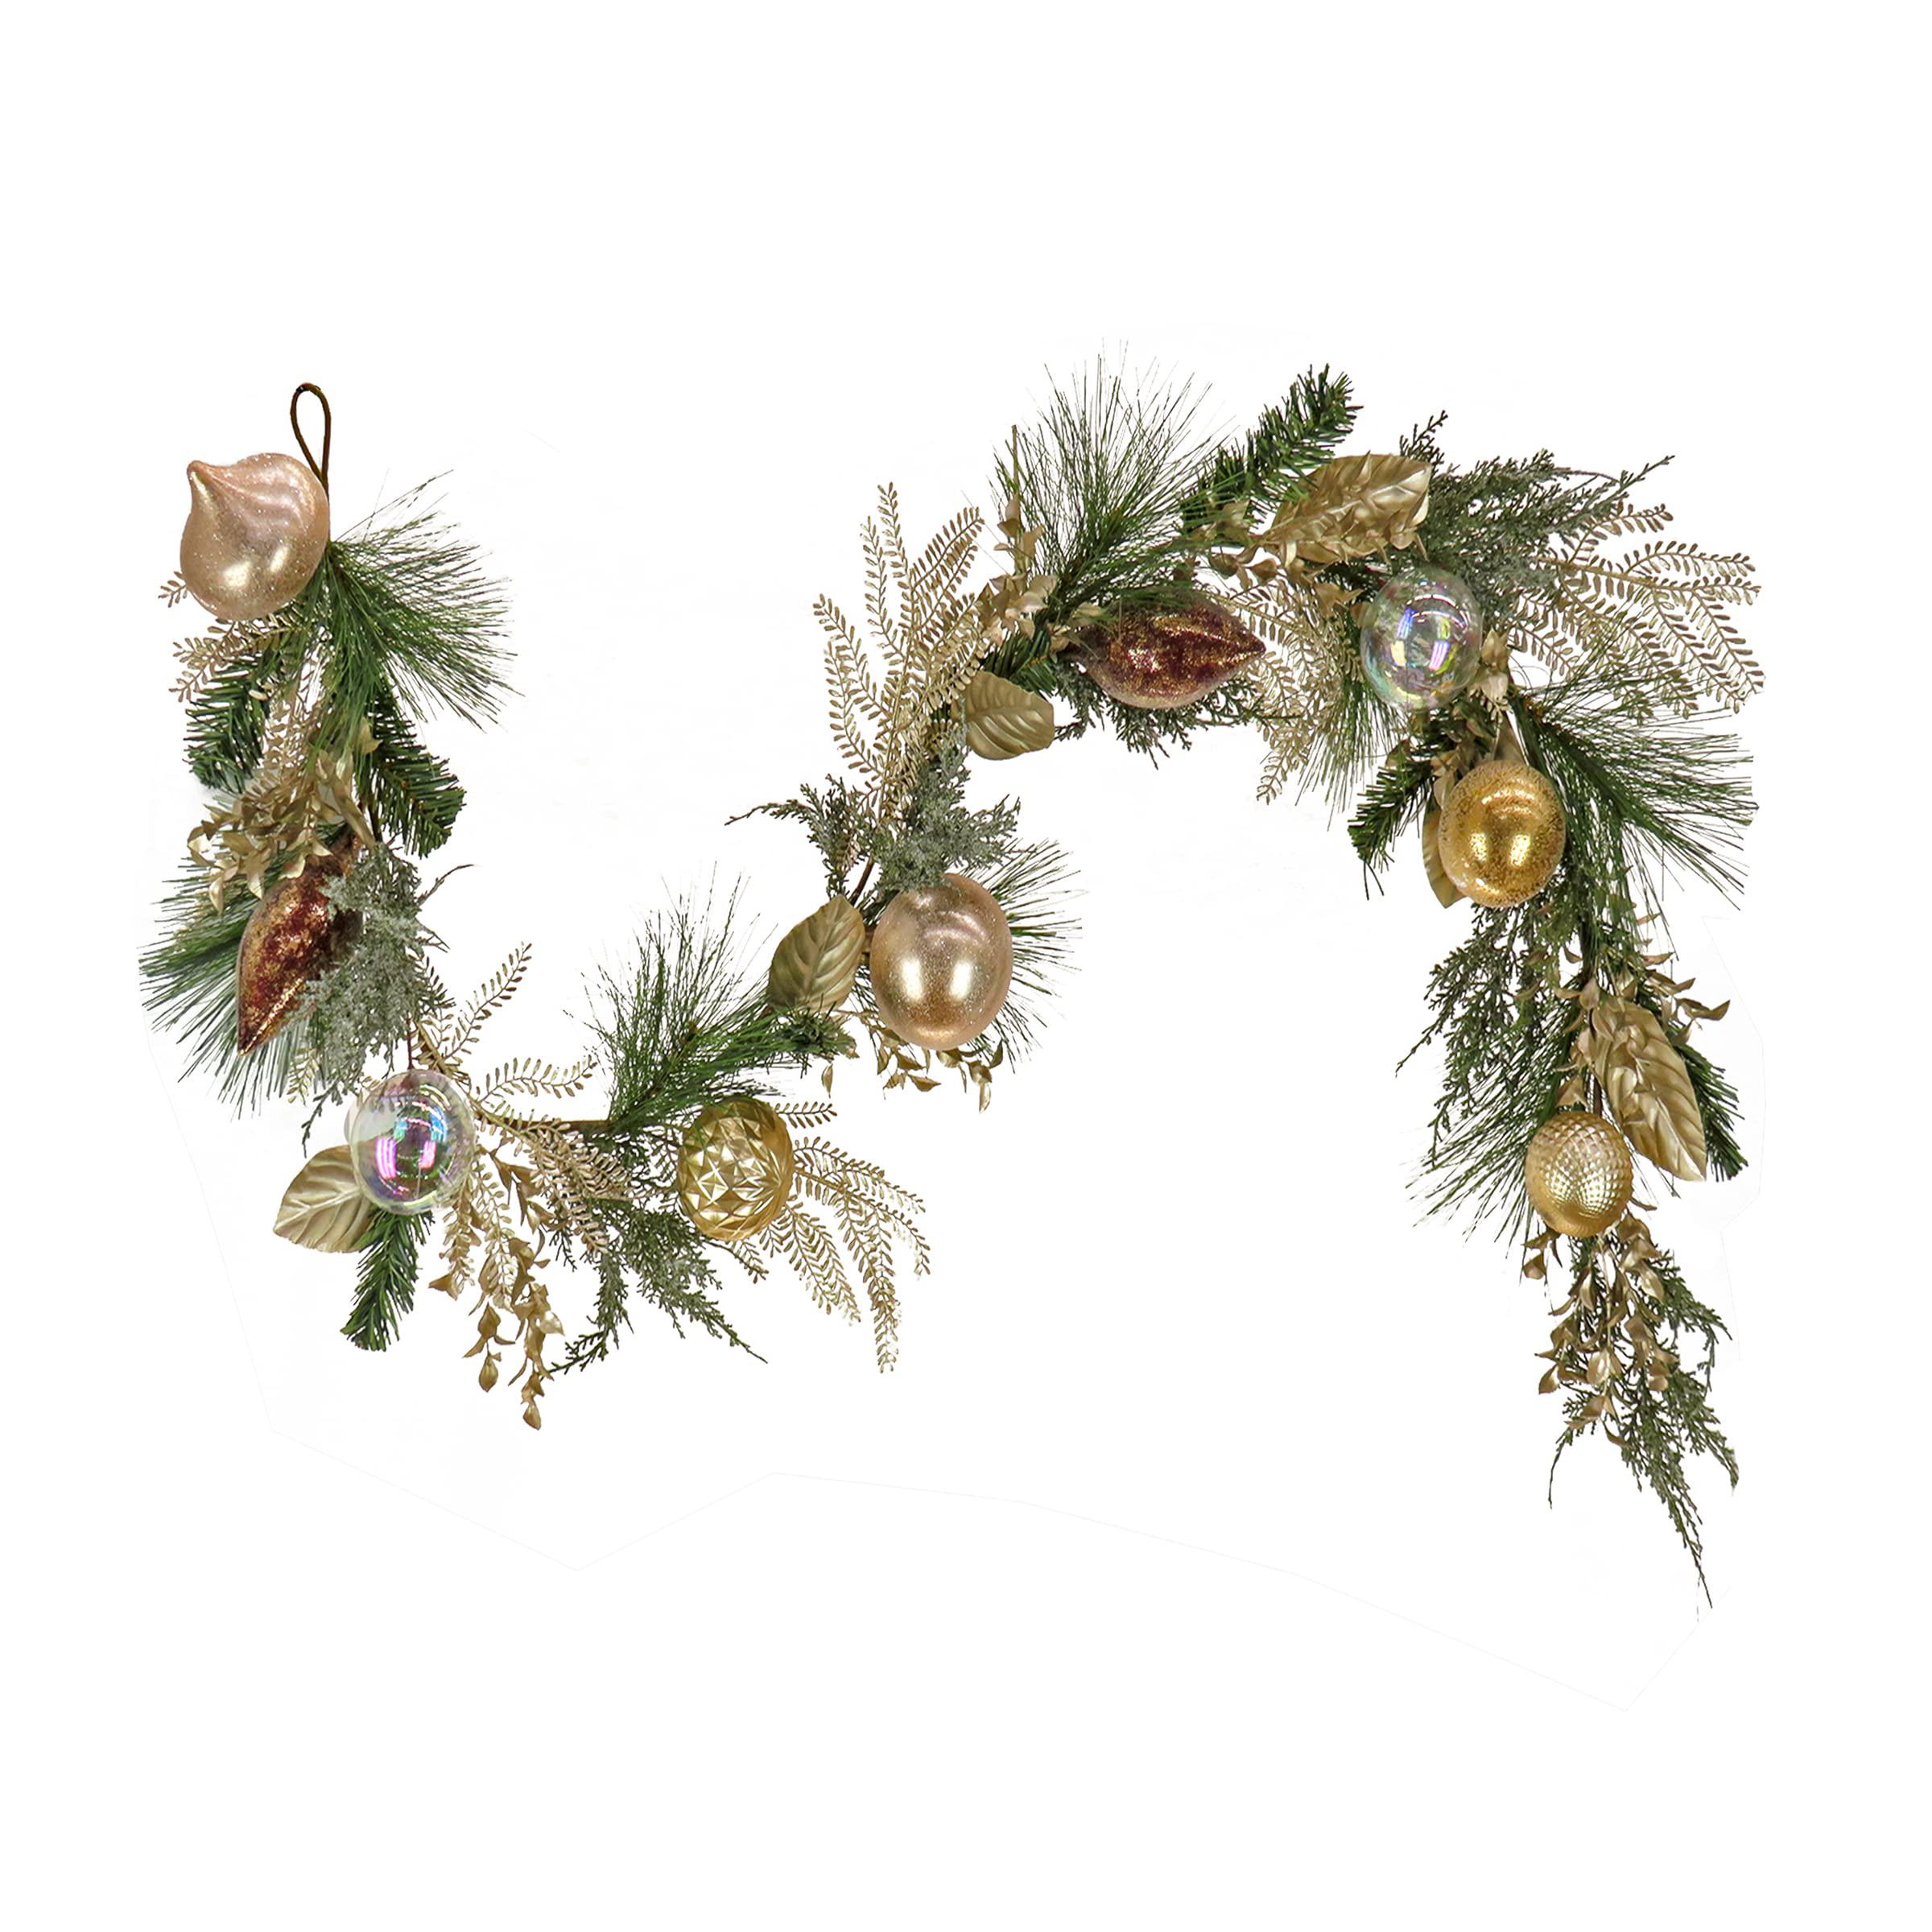 National Tree Company hgtv home collection unlit artificial christmas garland, mixed branch tips and fern fronds, flexible vine base, unlit, 72 inc